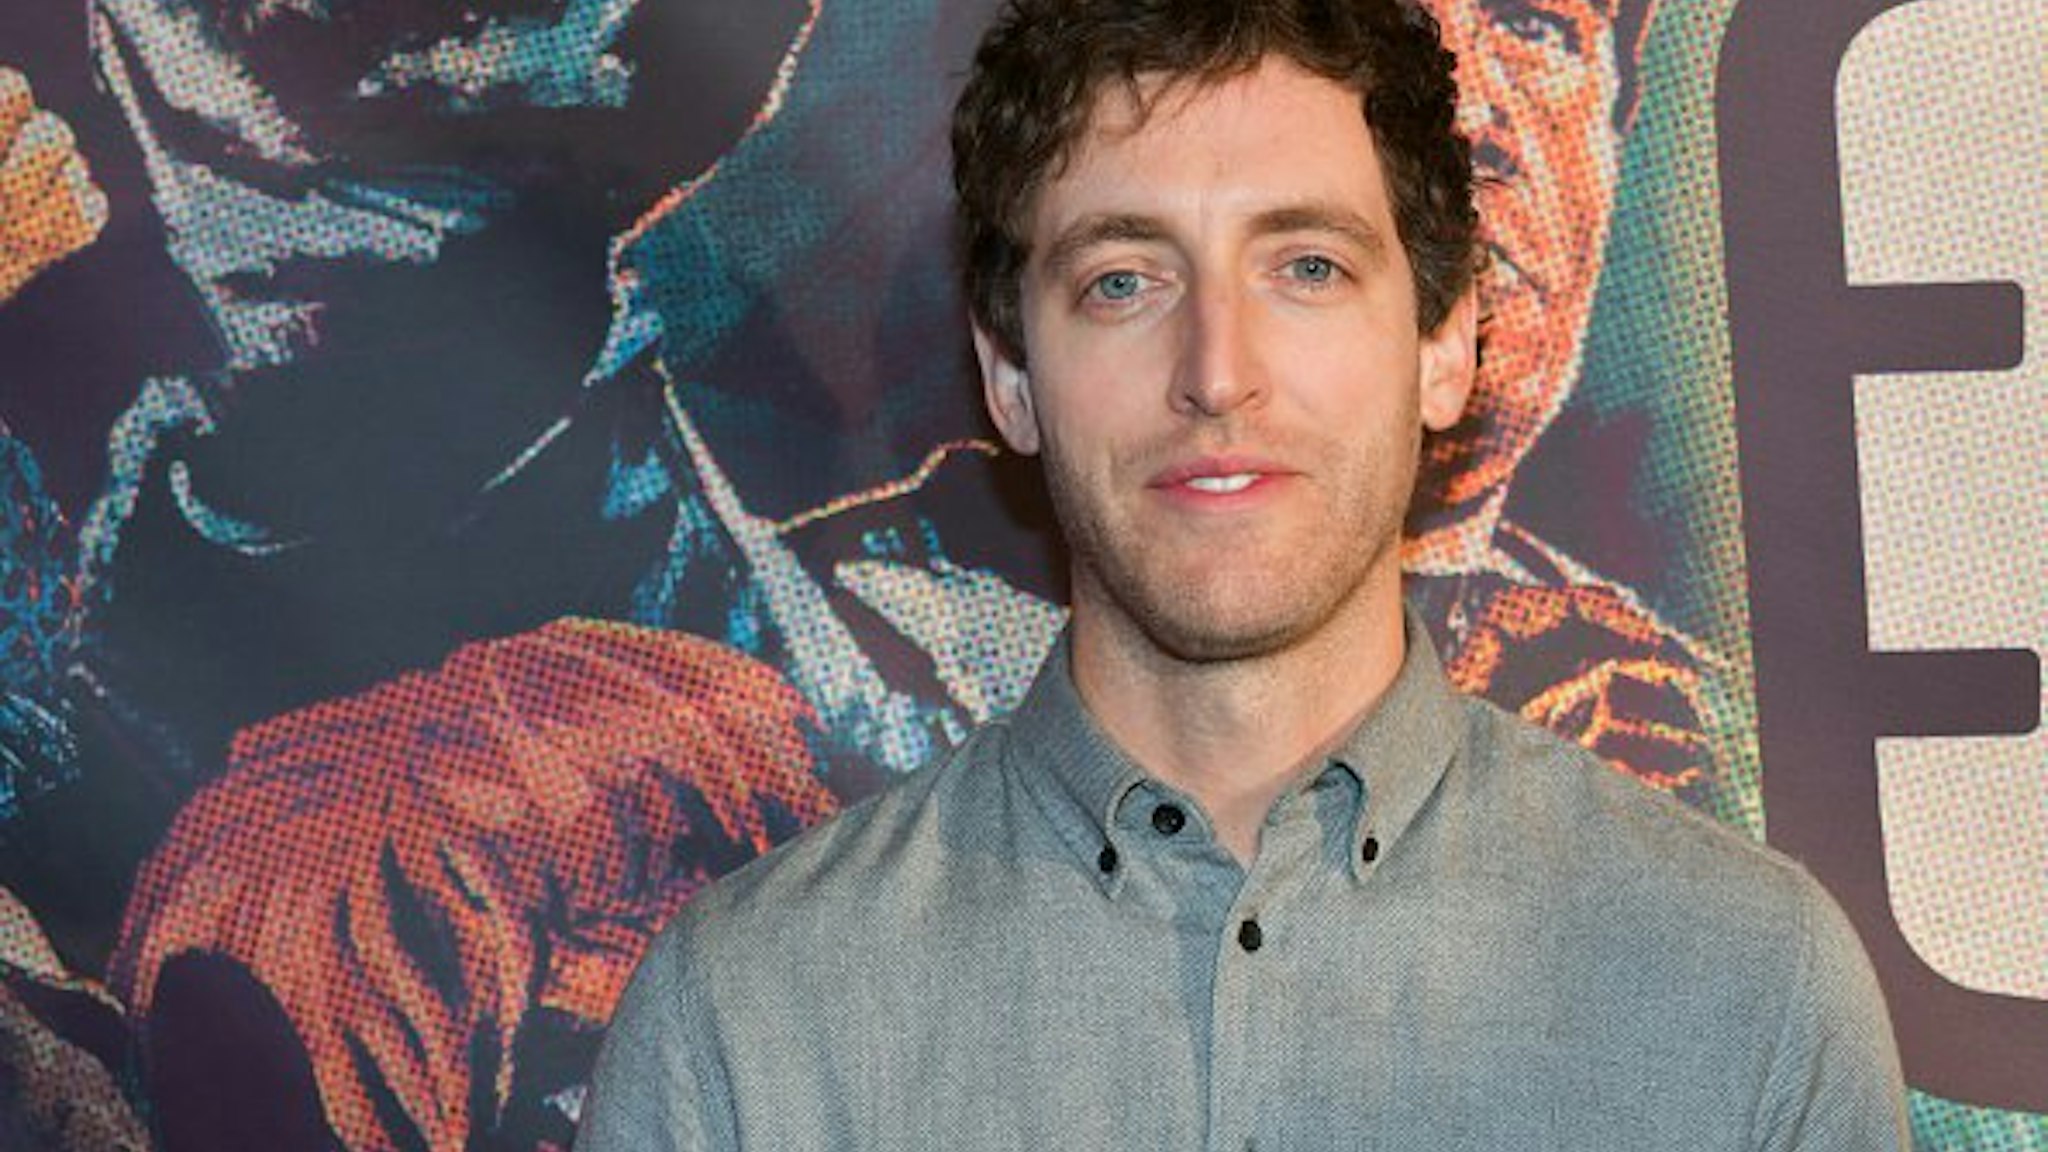 Thomas Middleditch attends the Alamo Drafthouse Los Angeles Big Bash Party at Alamo Drafthouse Cinema on August 08, 2019 in Los Angeles, California.